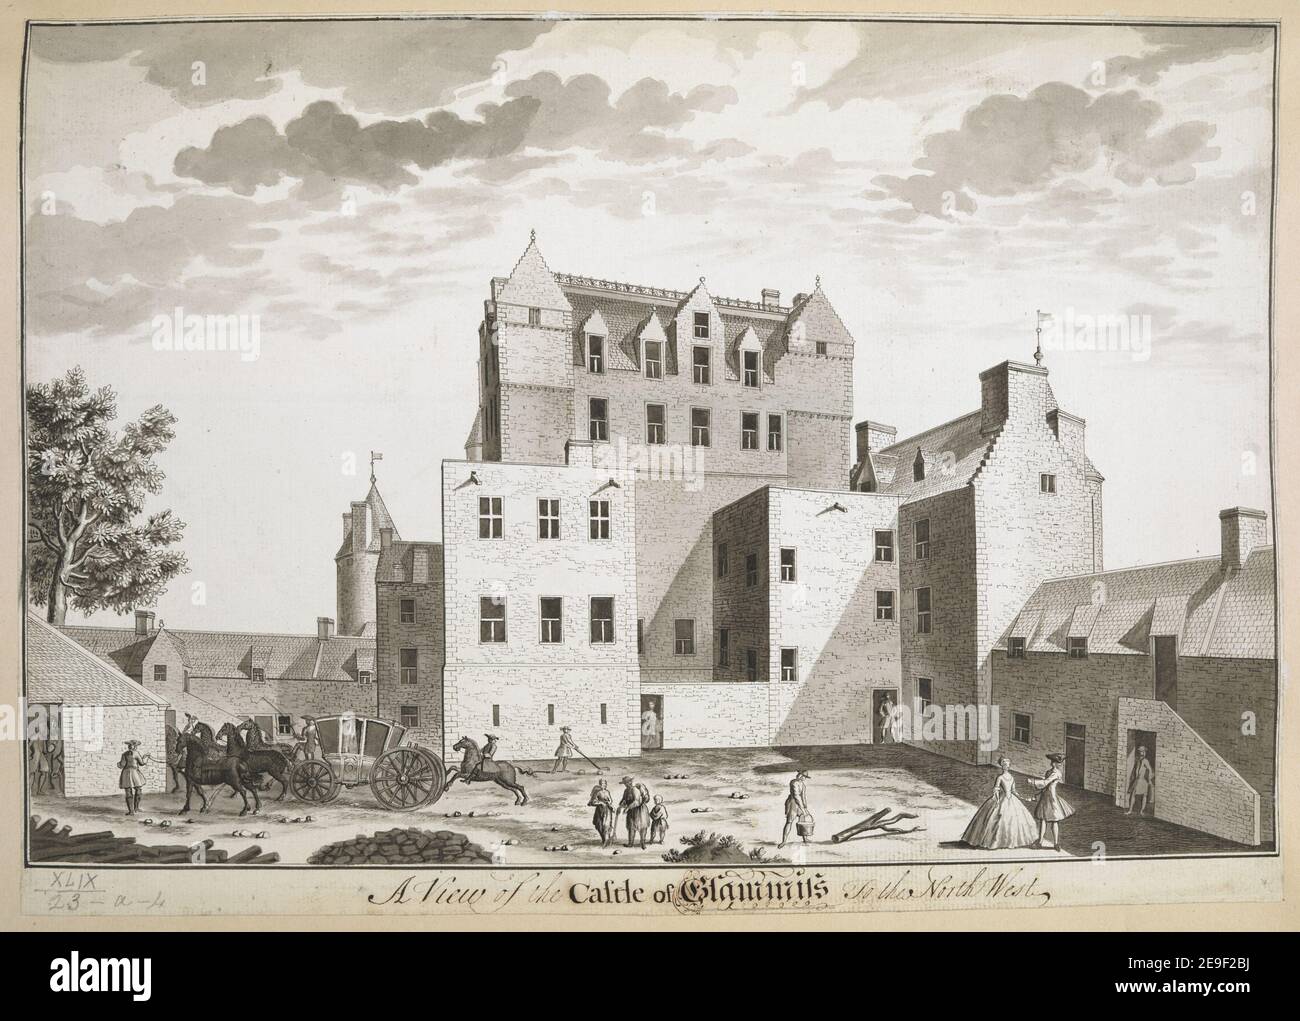 A View of the Castle of Glammis To the North West. Author  Elphinstone, John 49.23.a.4. Date of publication: [between about 1740-1750]  Item type: 1 drawing Medium: pen and black ink with monochrome wash Dimensions: sheet 21.7 x 30.6 cm  Former owner: George III, King of Great Britain, 1738-1820 Stock Photo